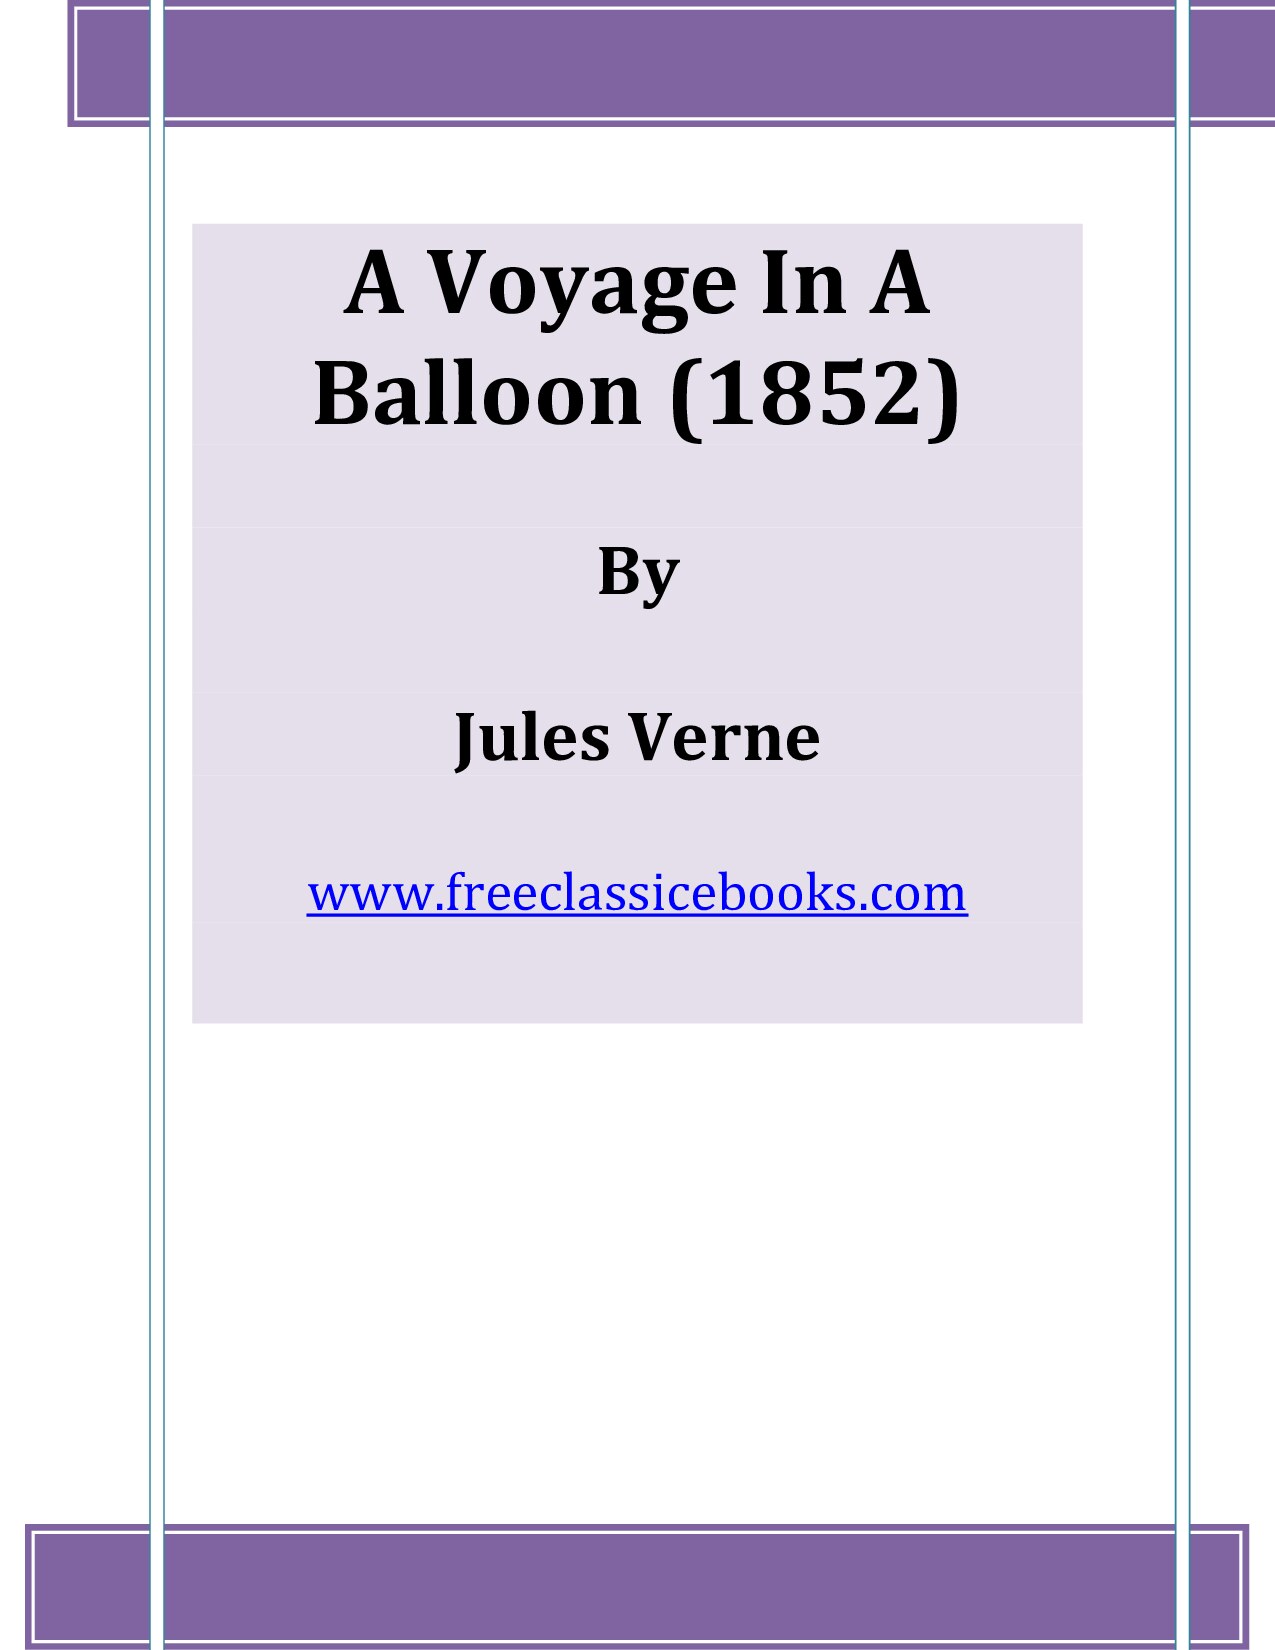 Microsoft Word - A Voyage In A Balloon _1852_.doc